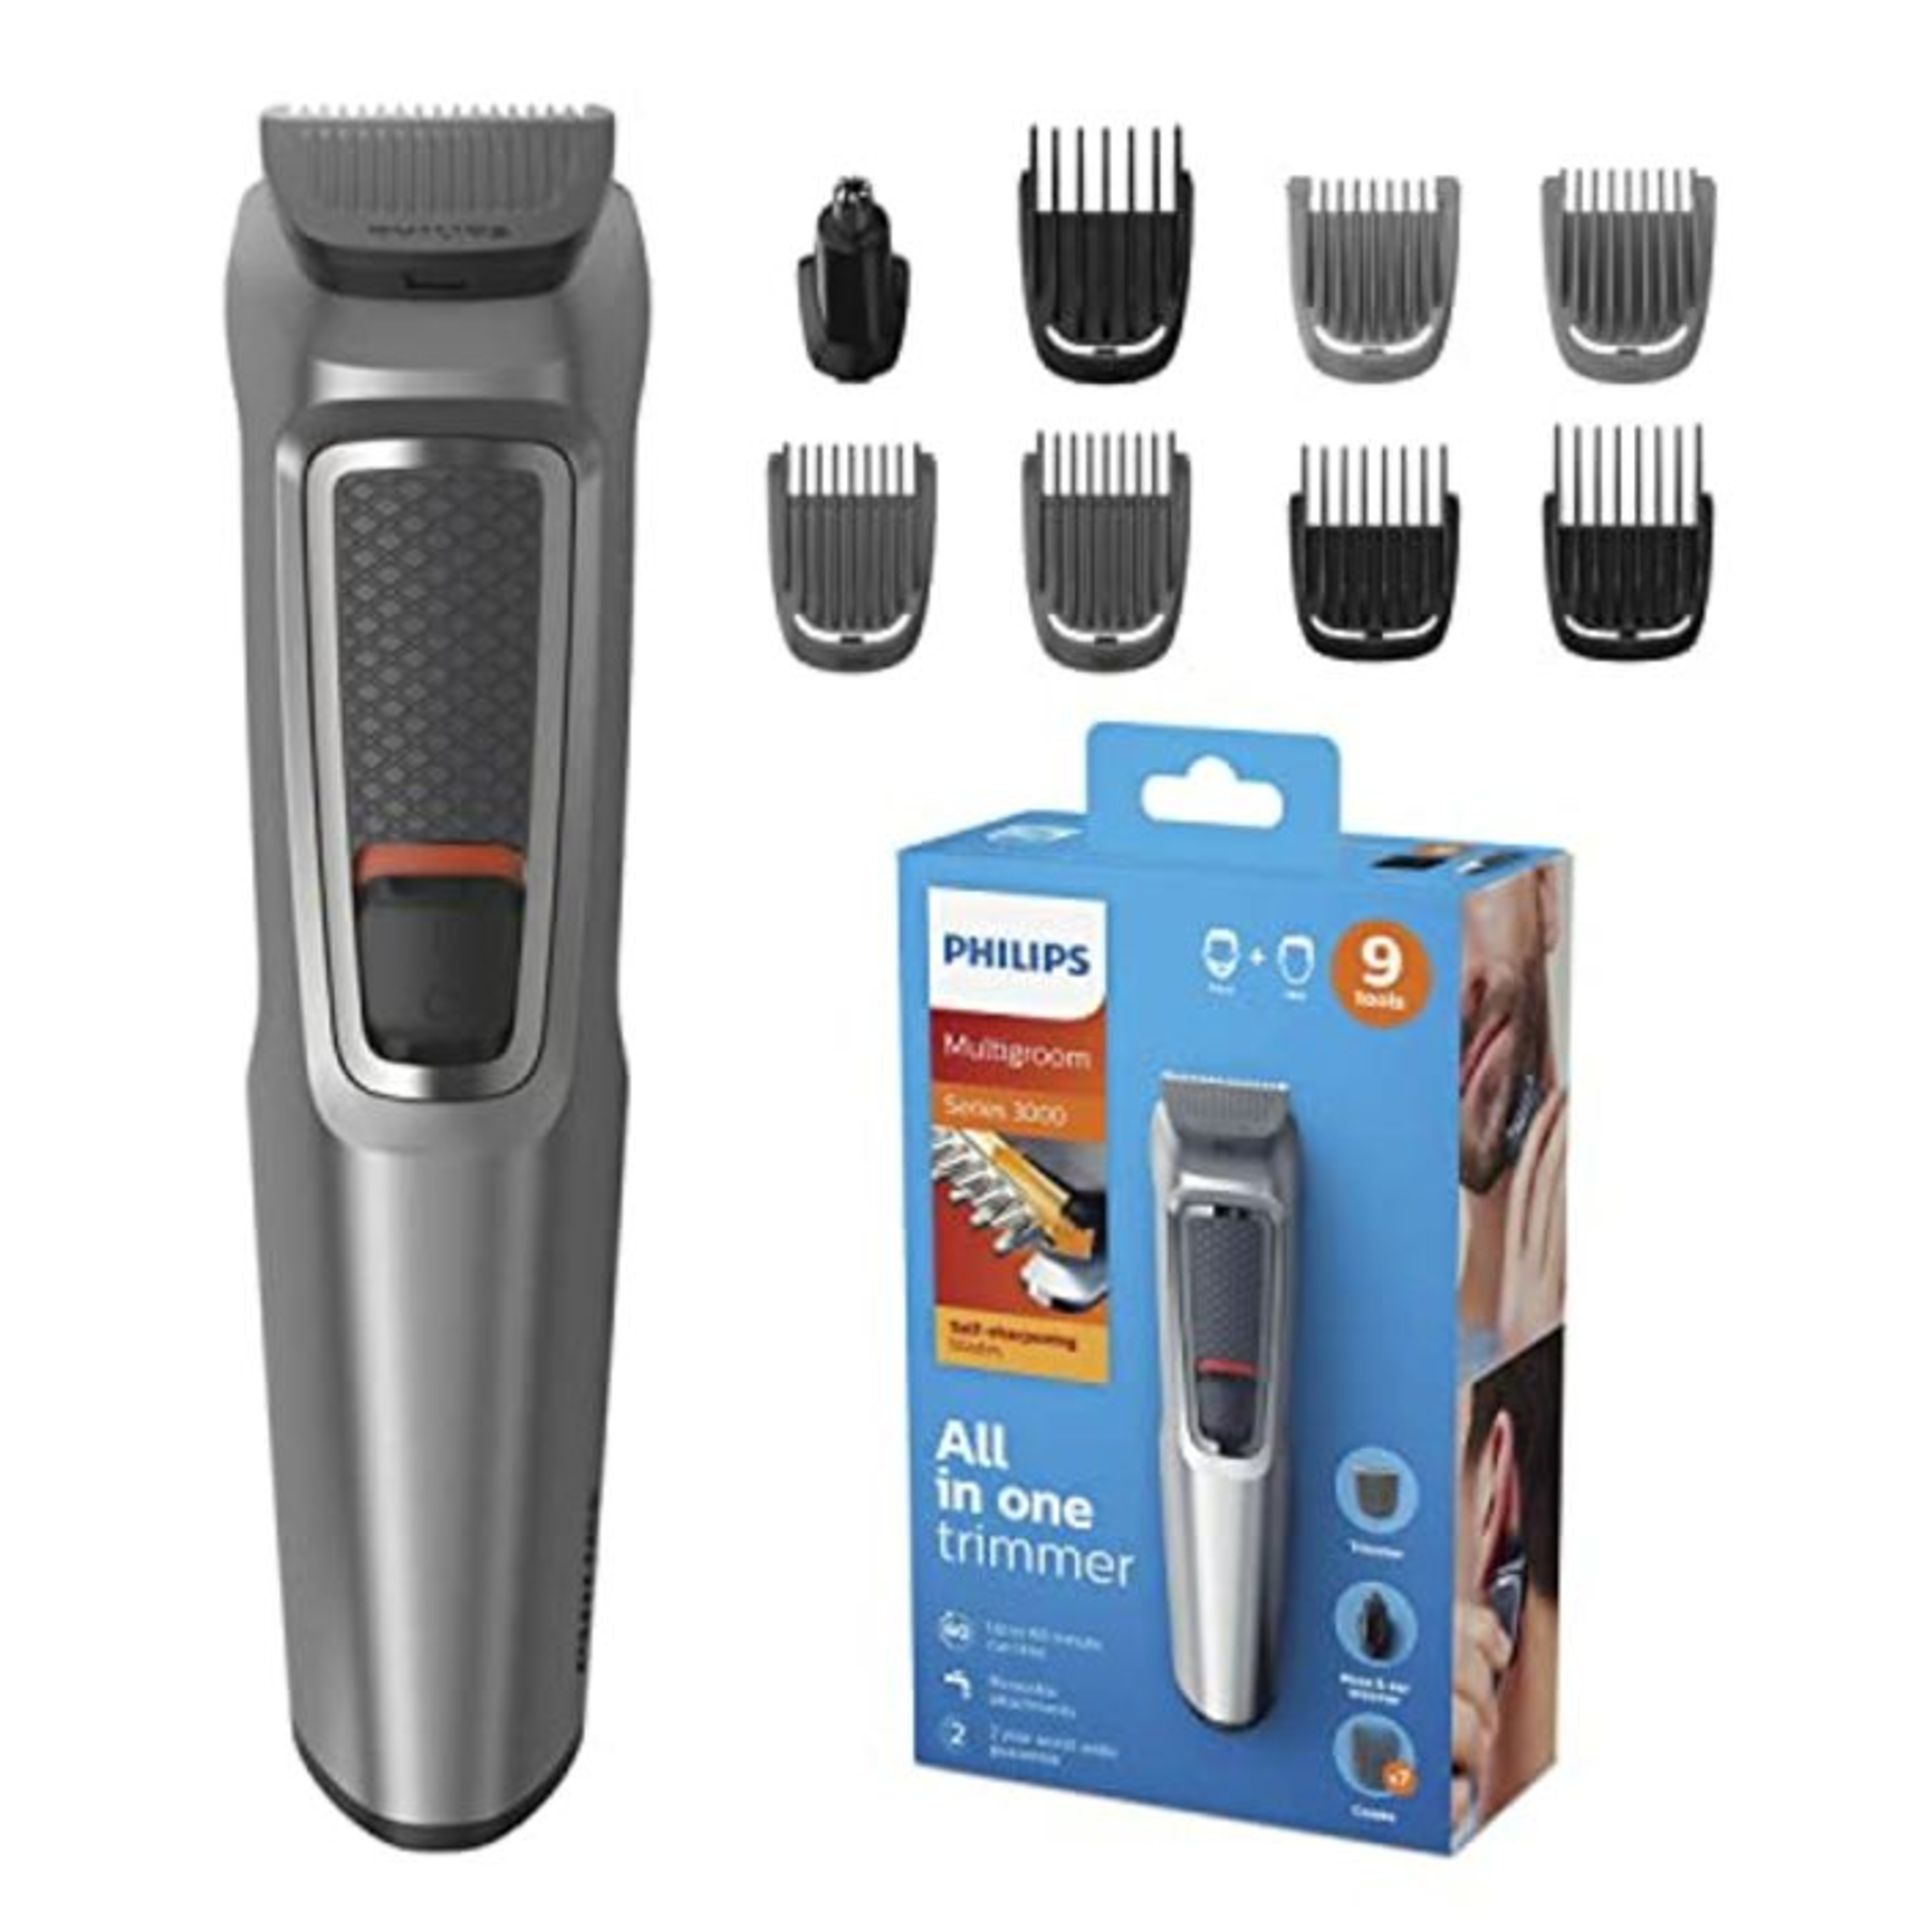 Philips 9-in-1 All-In-One Trimmer, Series 3000 Grooming Kit, Beard Trimmer and Hair Cl